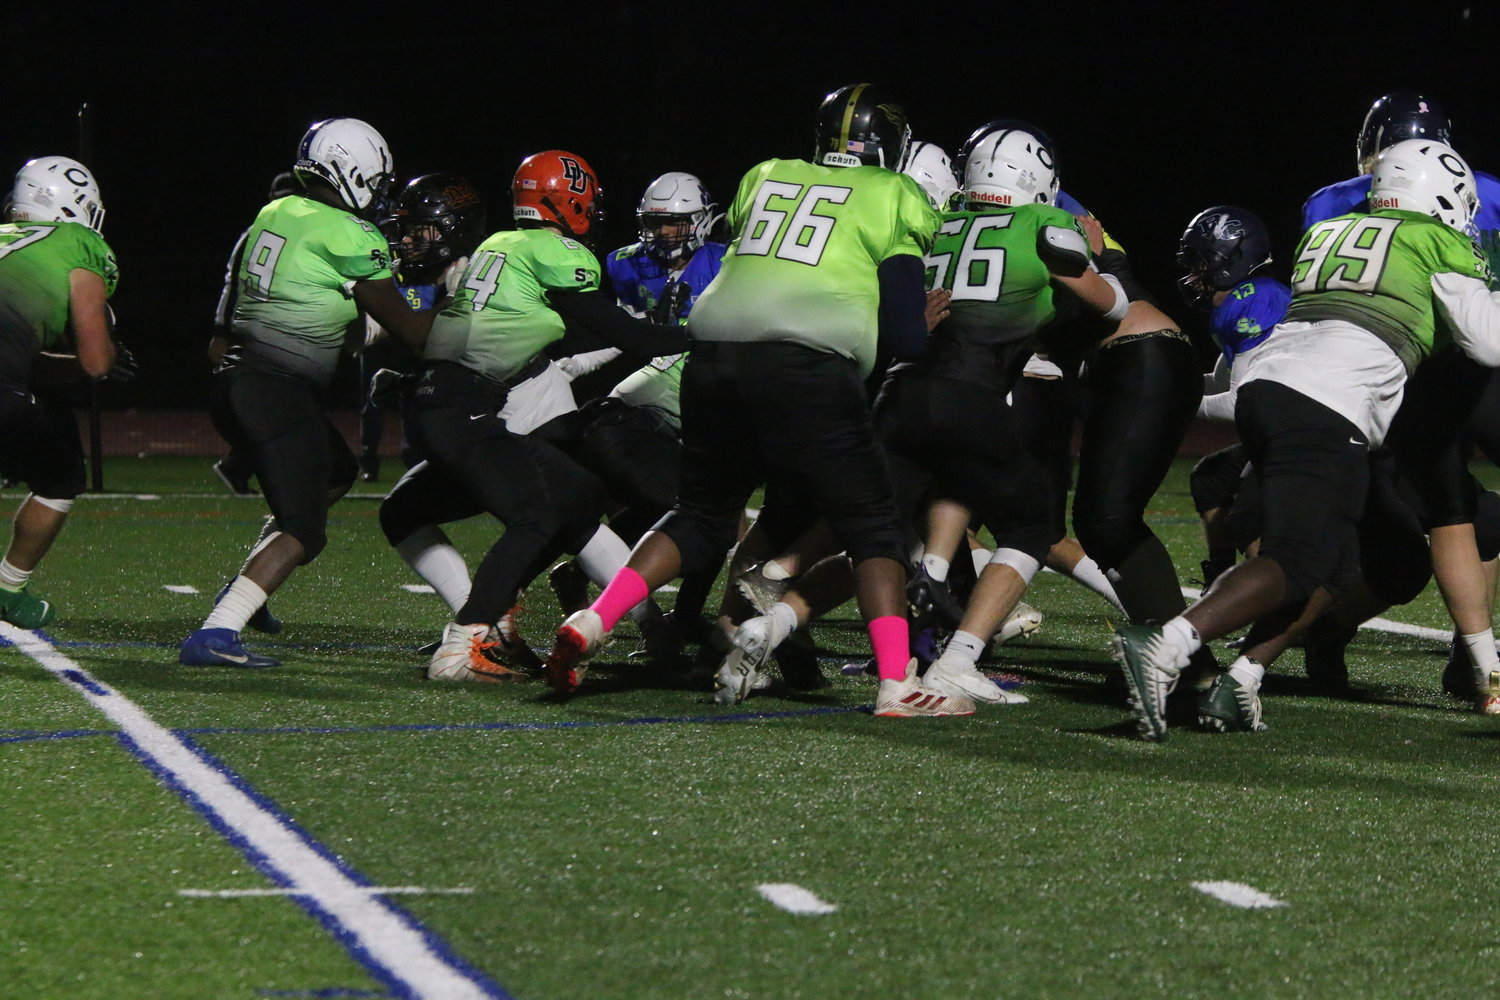 Fallsburg’s Bryan Akinde (66) uses his imposing size to impact a play at the line of scrimmage.